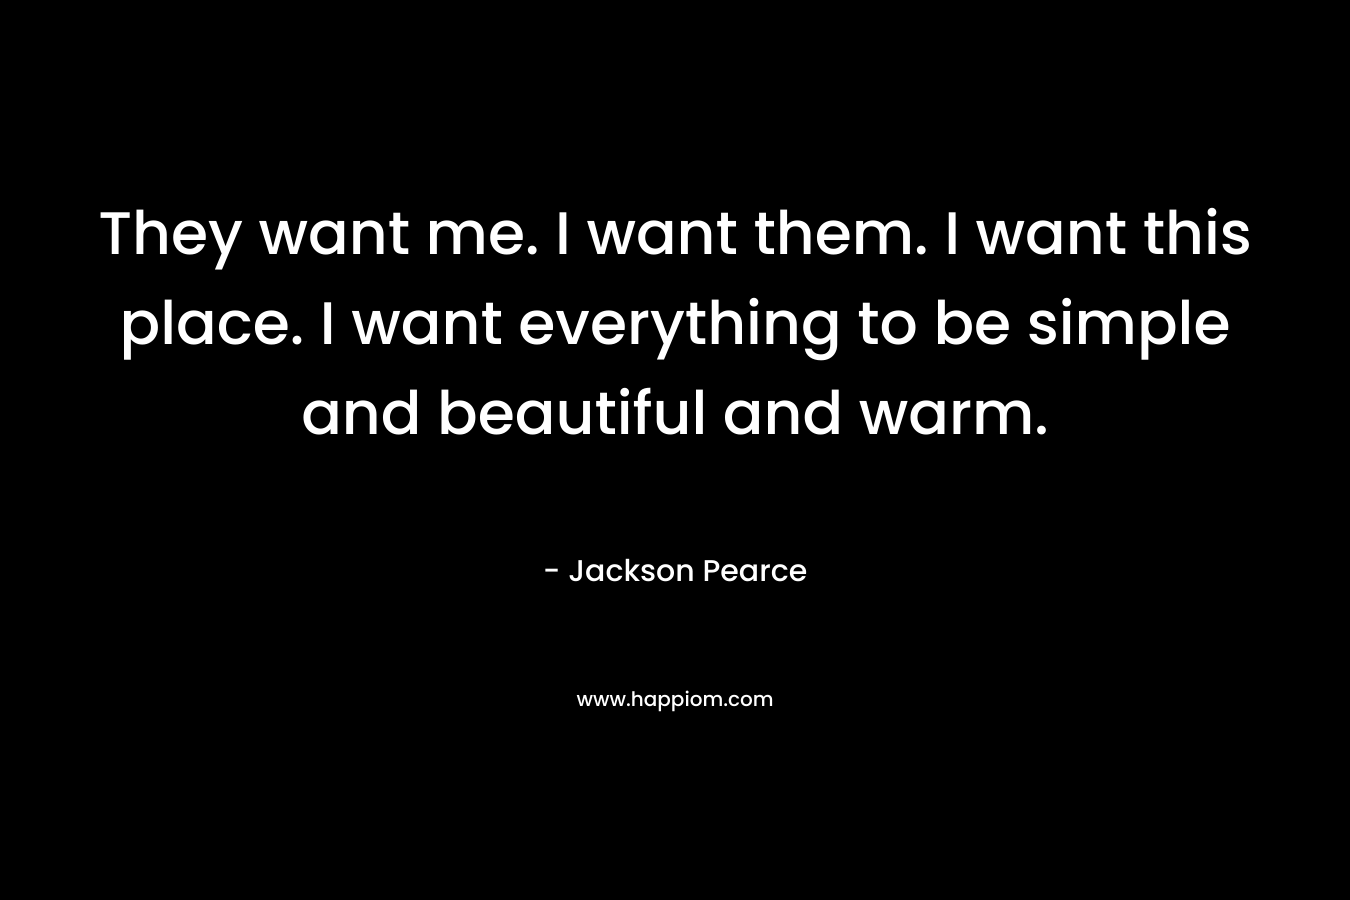 They want me. I want them. I want this place. I want everything to be simple and beautiful and warm. – Jackson Pearce